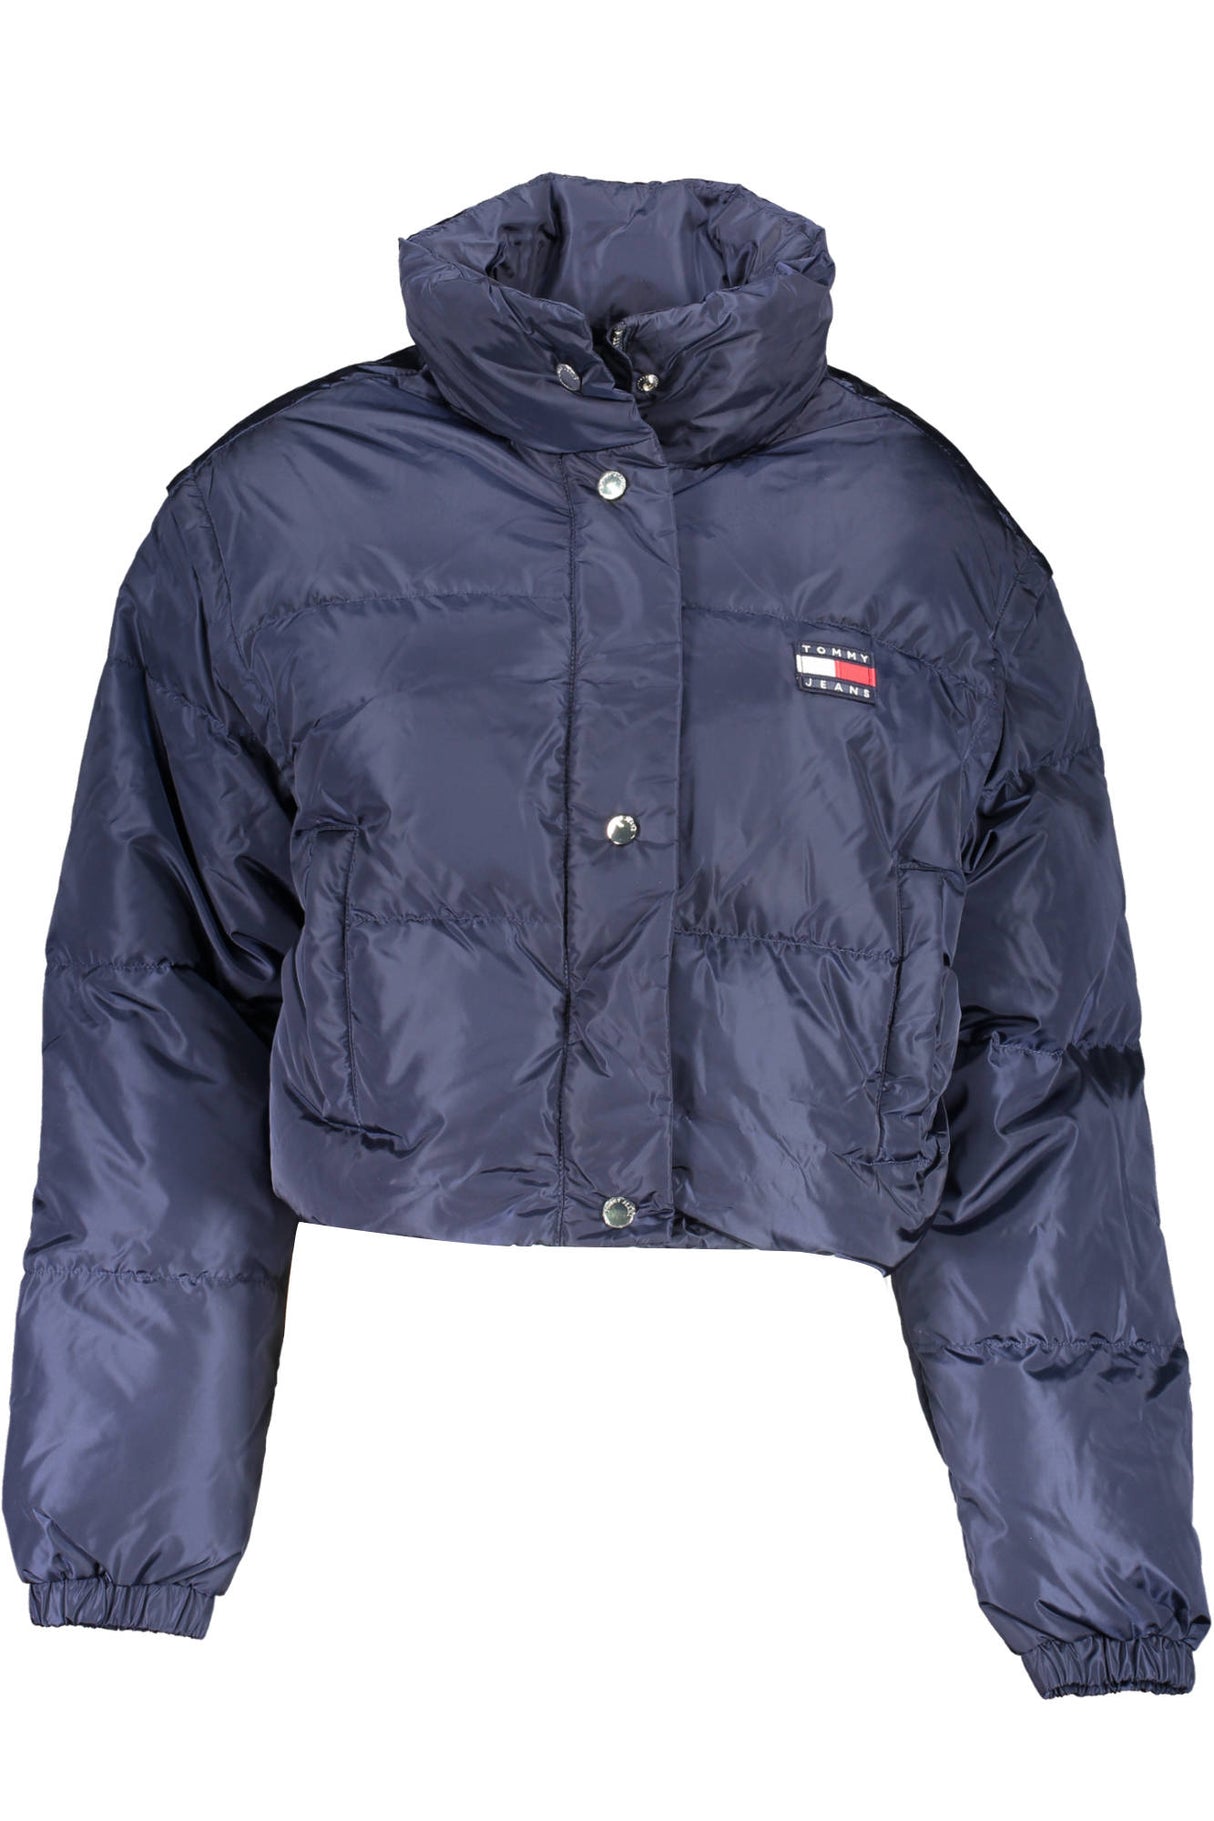 Tommy Hilfiger Original Jackets Available with MRP Tag Bar Code